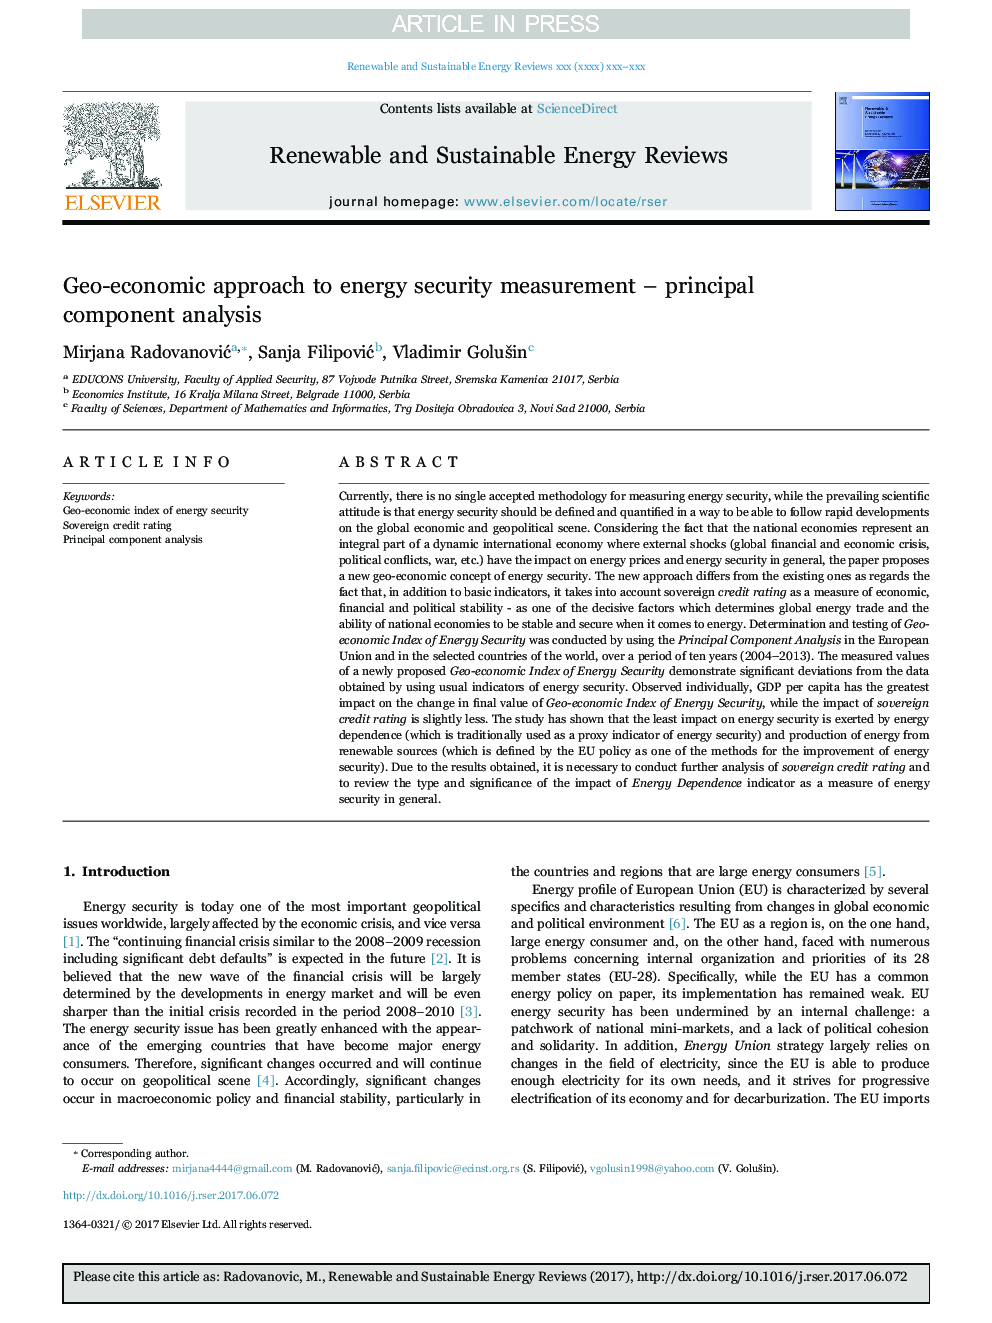 Geo-economic approach to energy security measurement - principal component analysis